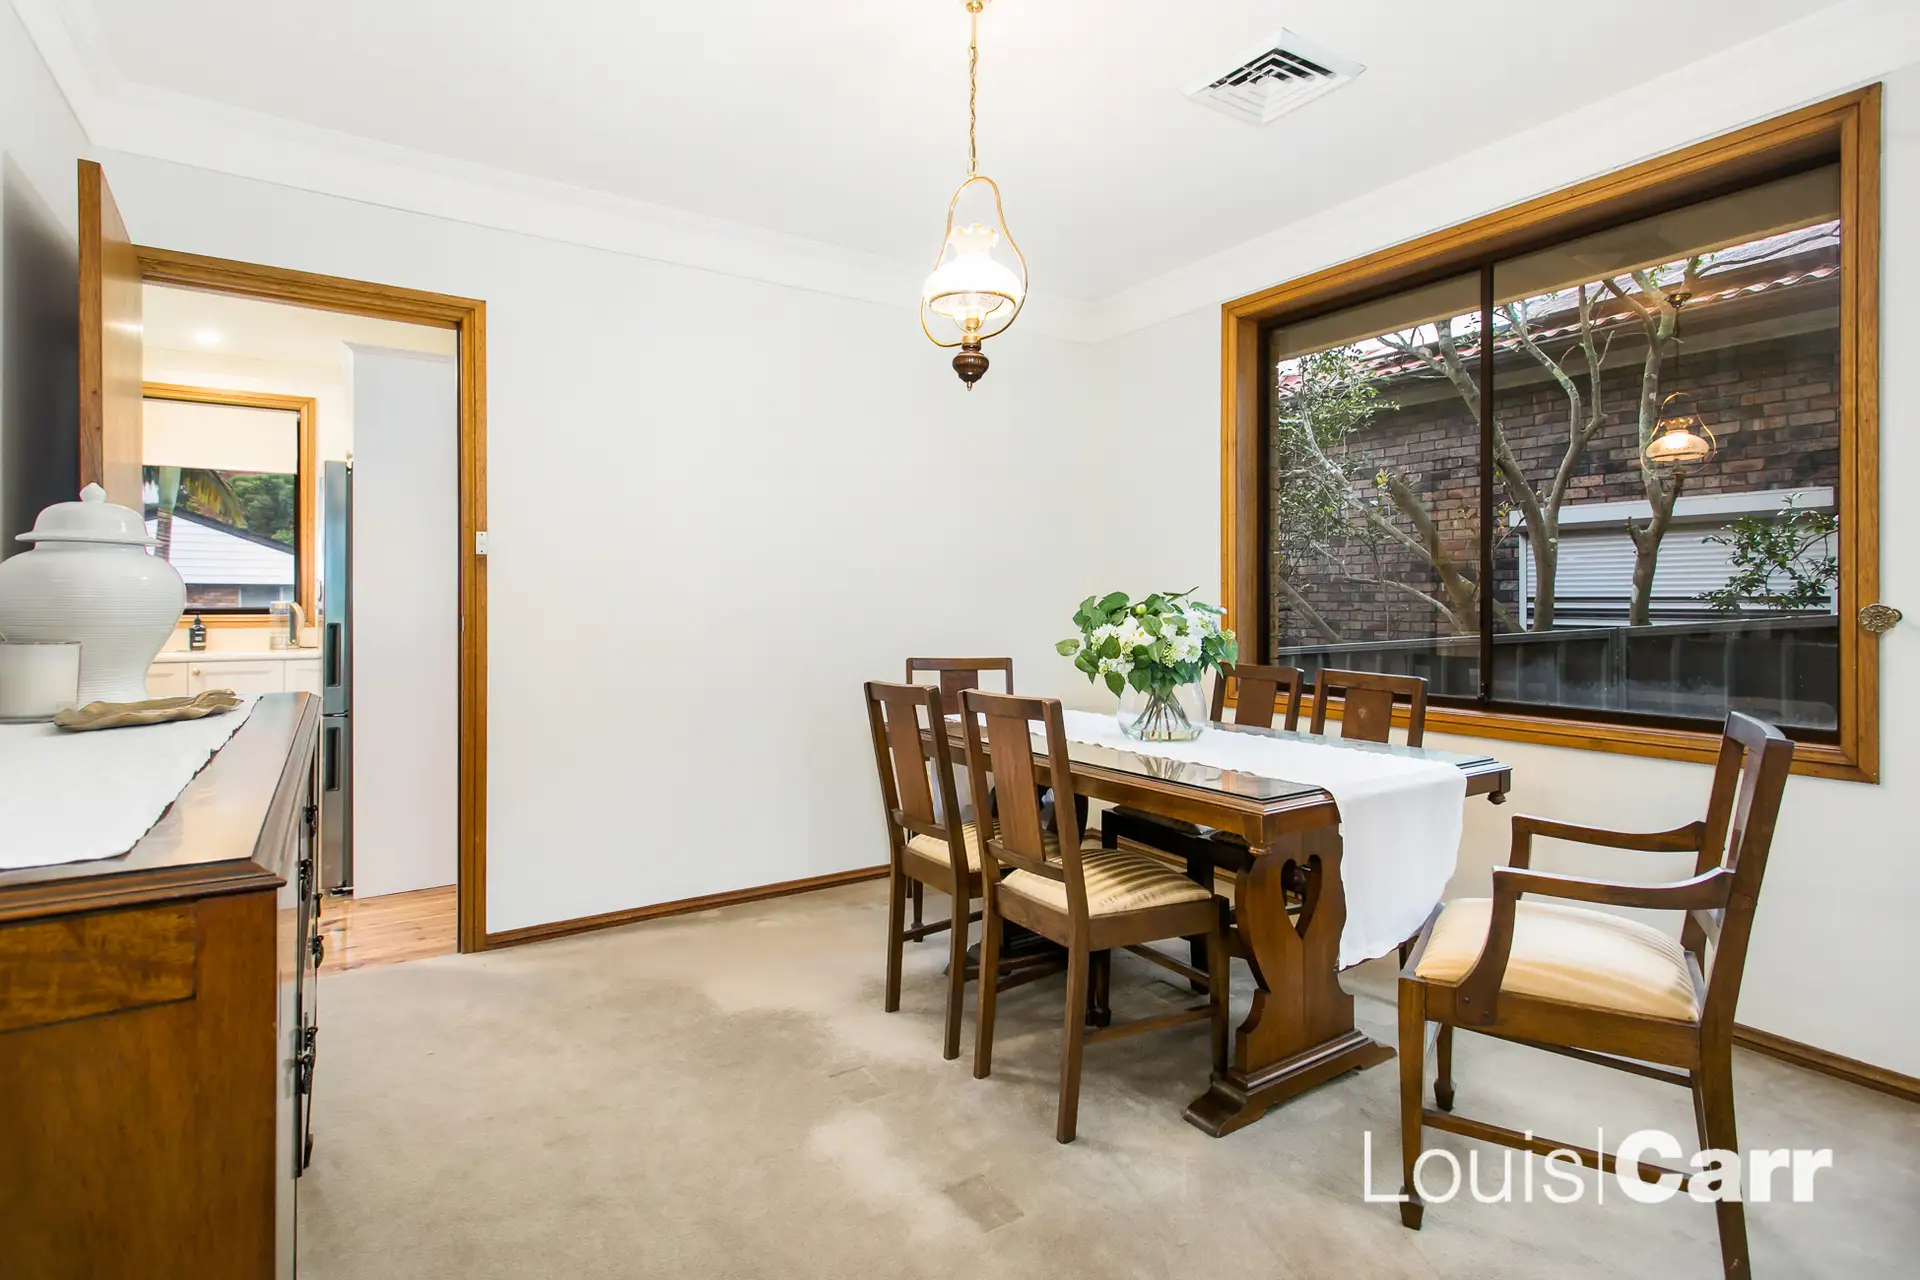 Photo #7: 7 Radley Place, Cherrybrook - Sold by Louis Carr Real Estate